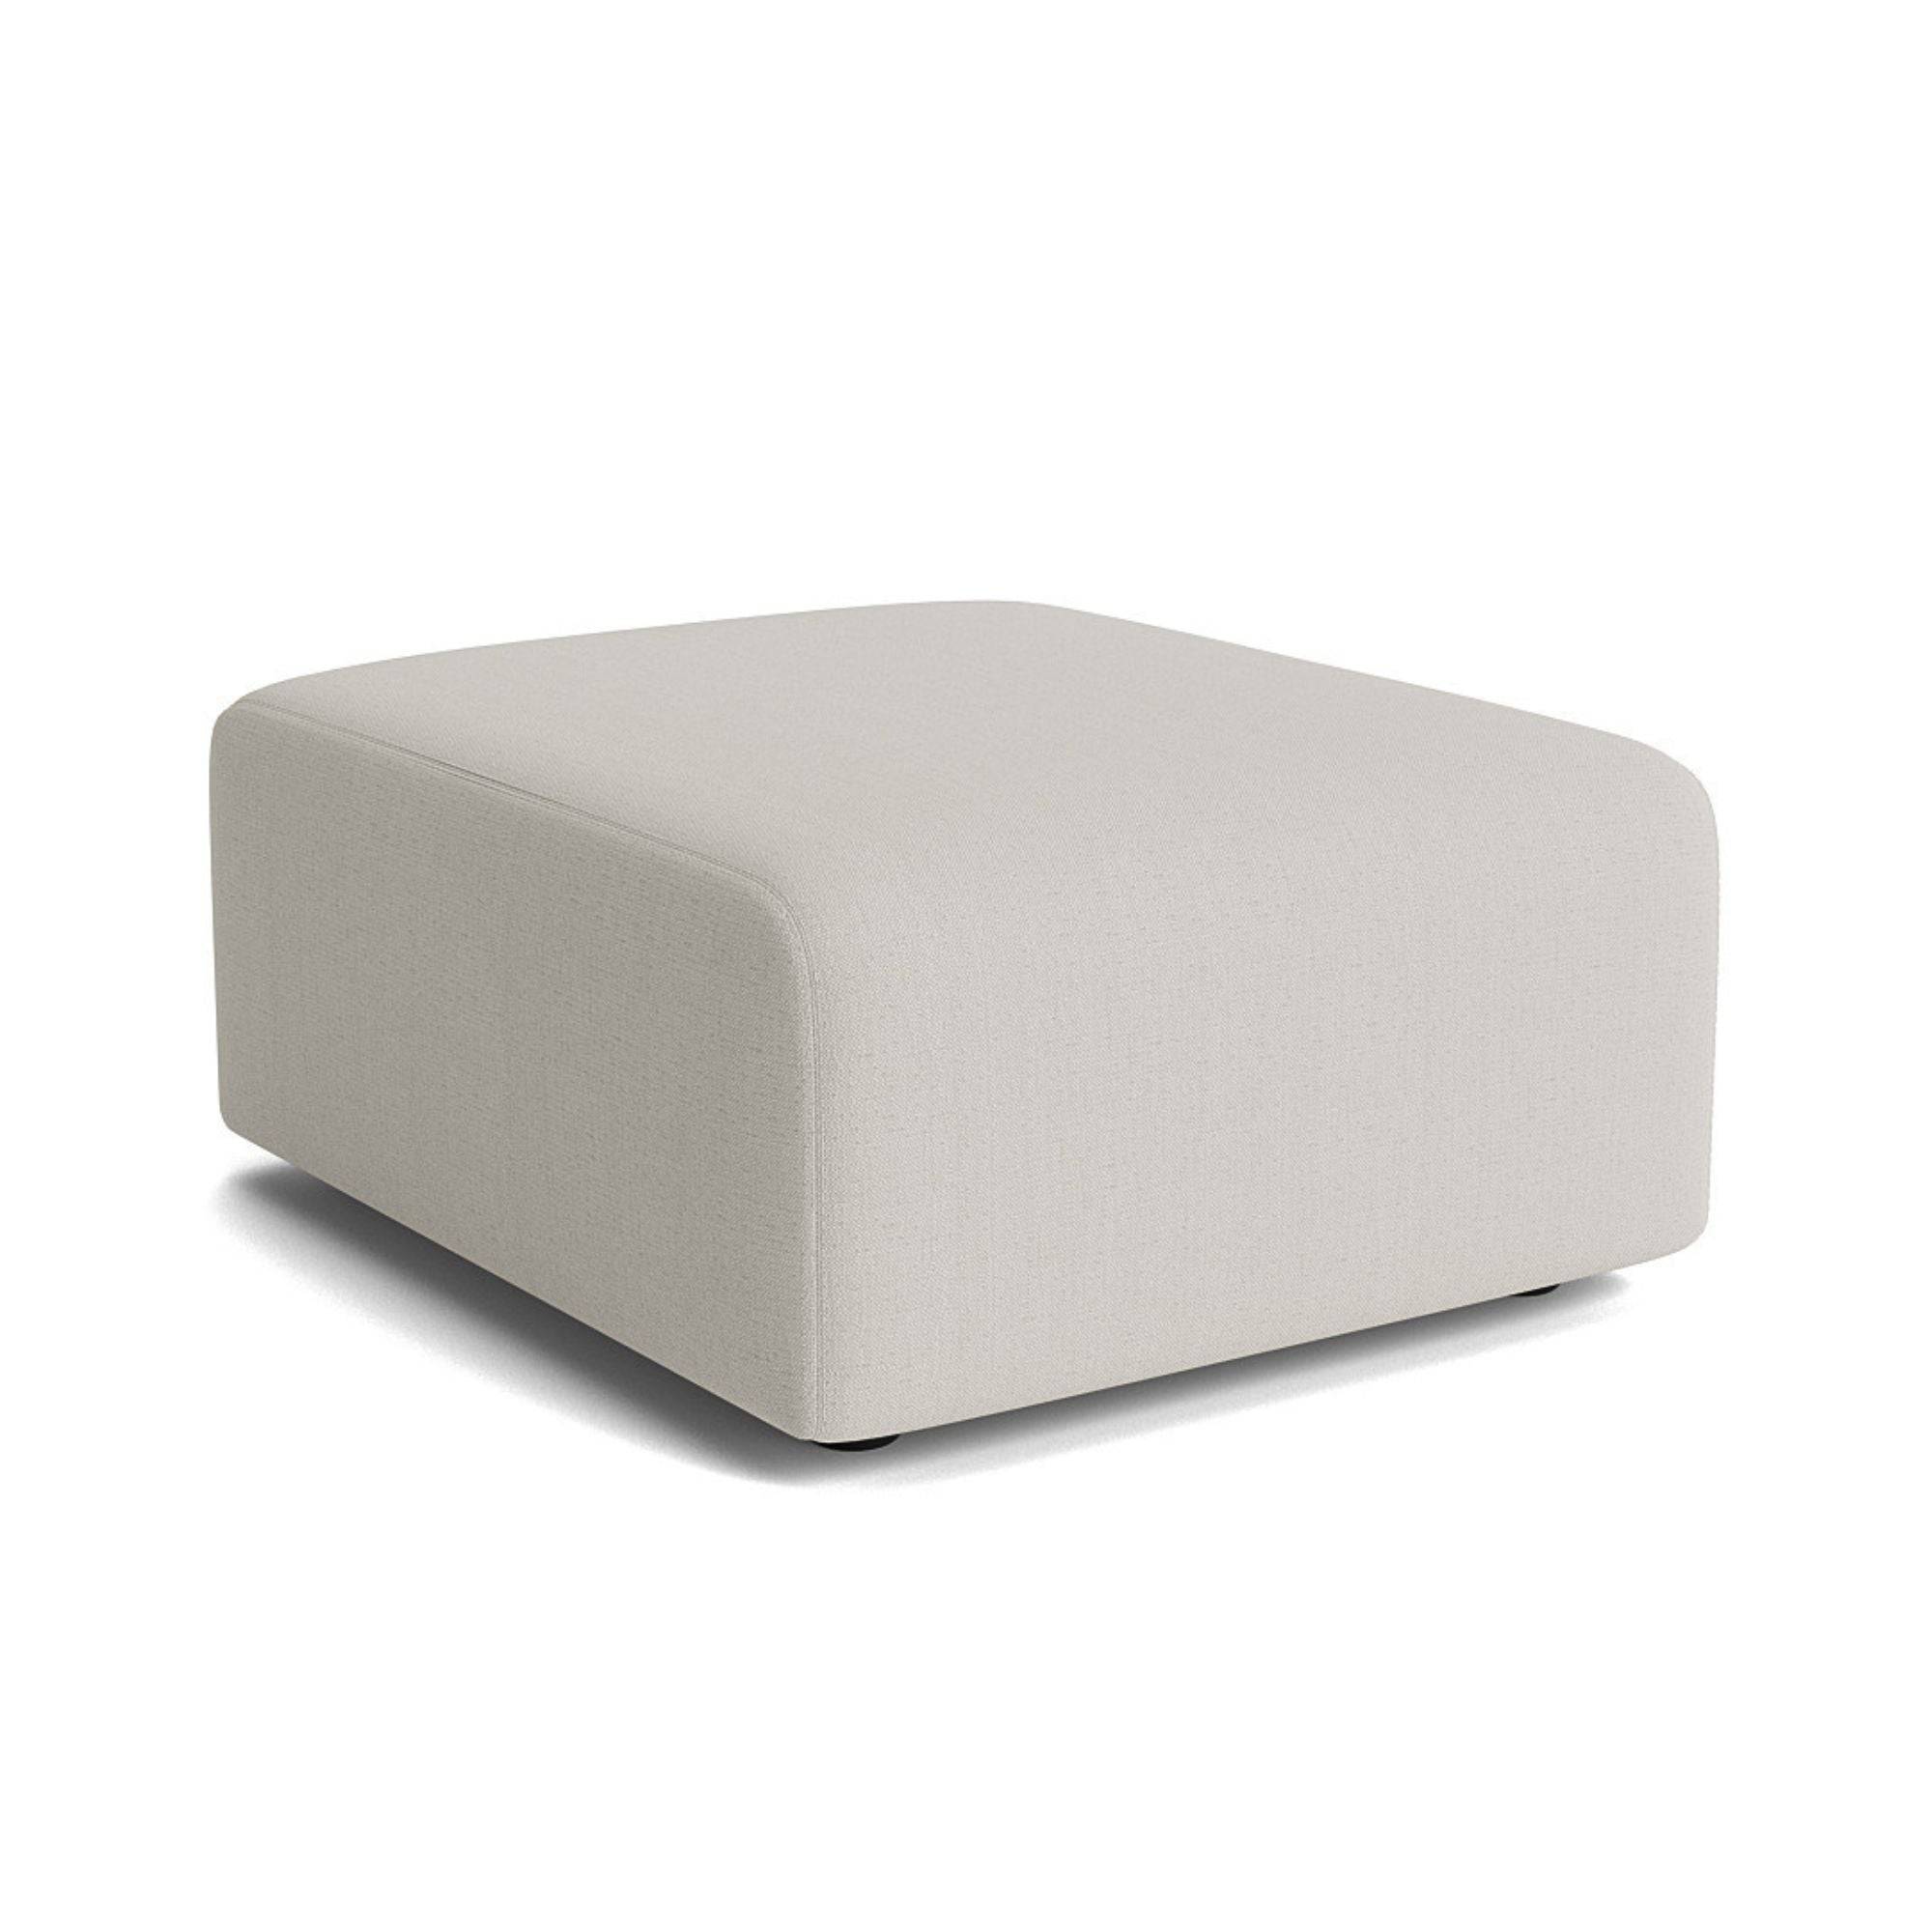 Outdoor Studio Ottoman Classic - THAT COOL LIVING